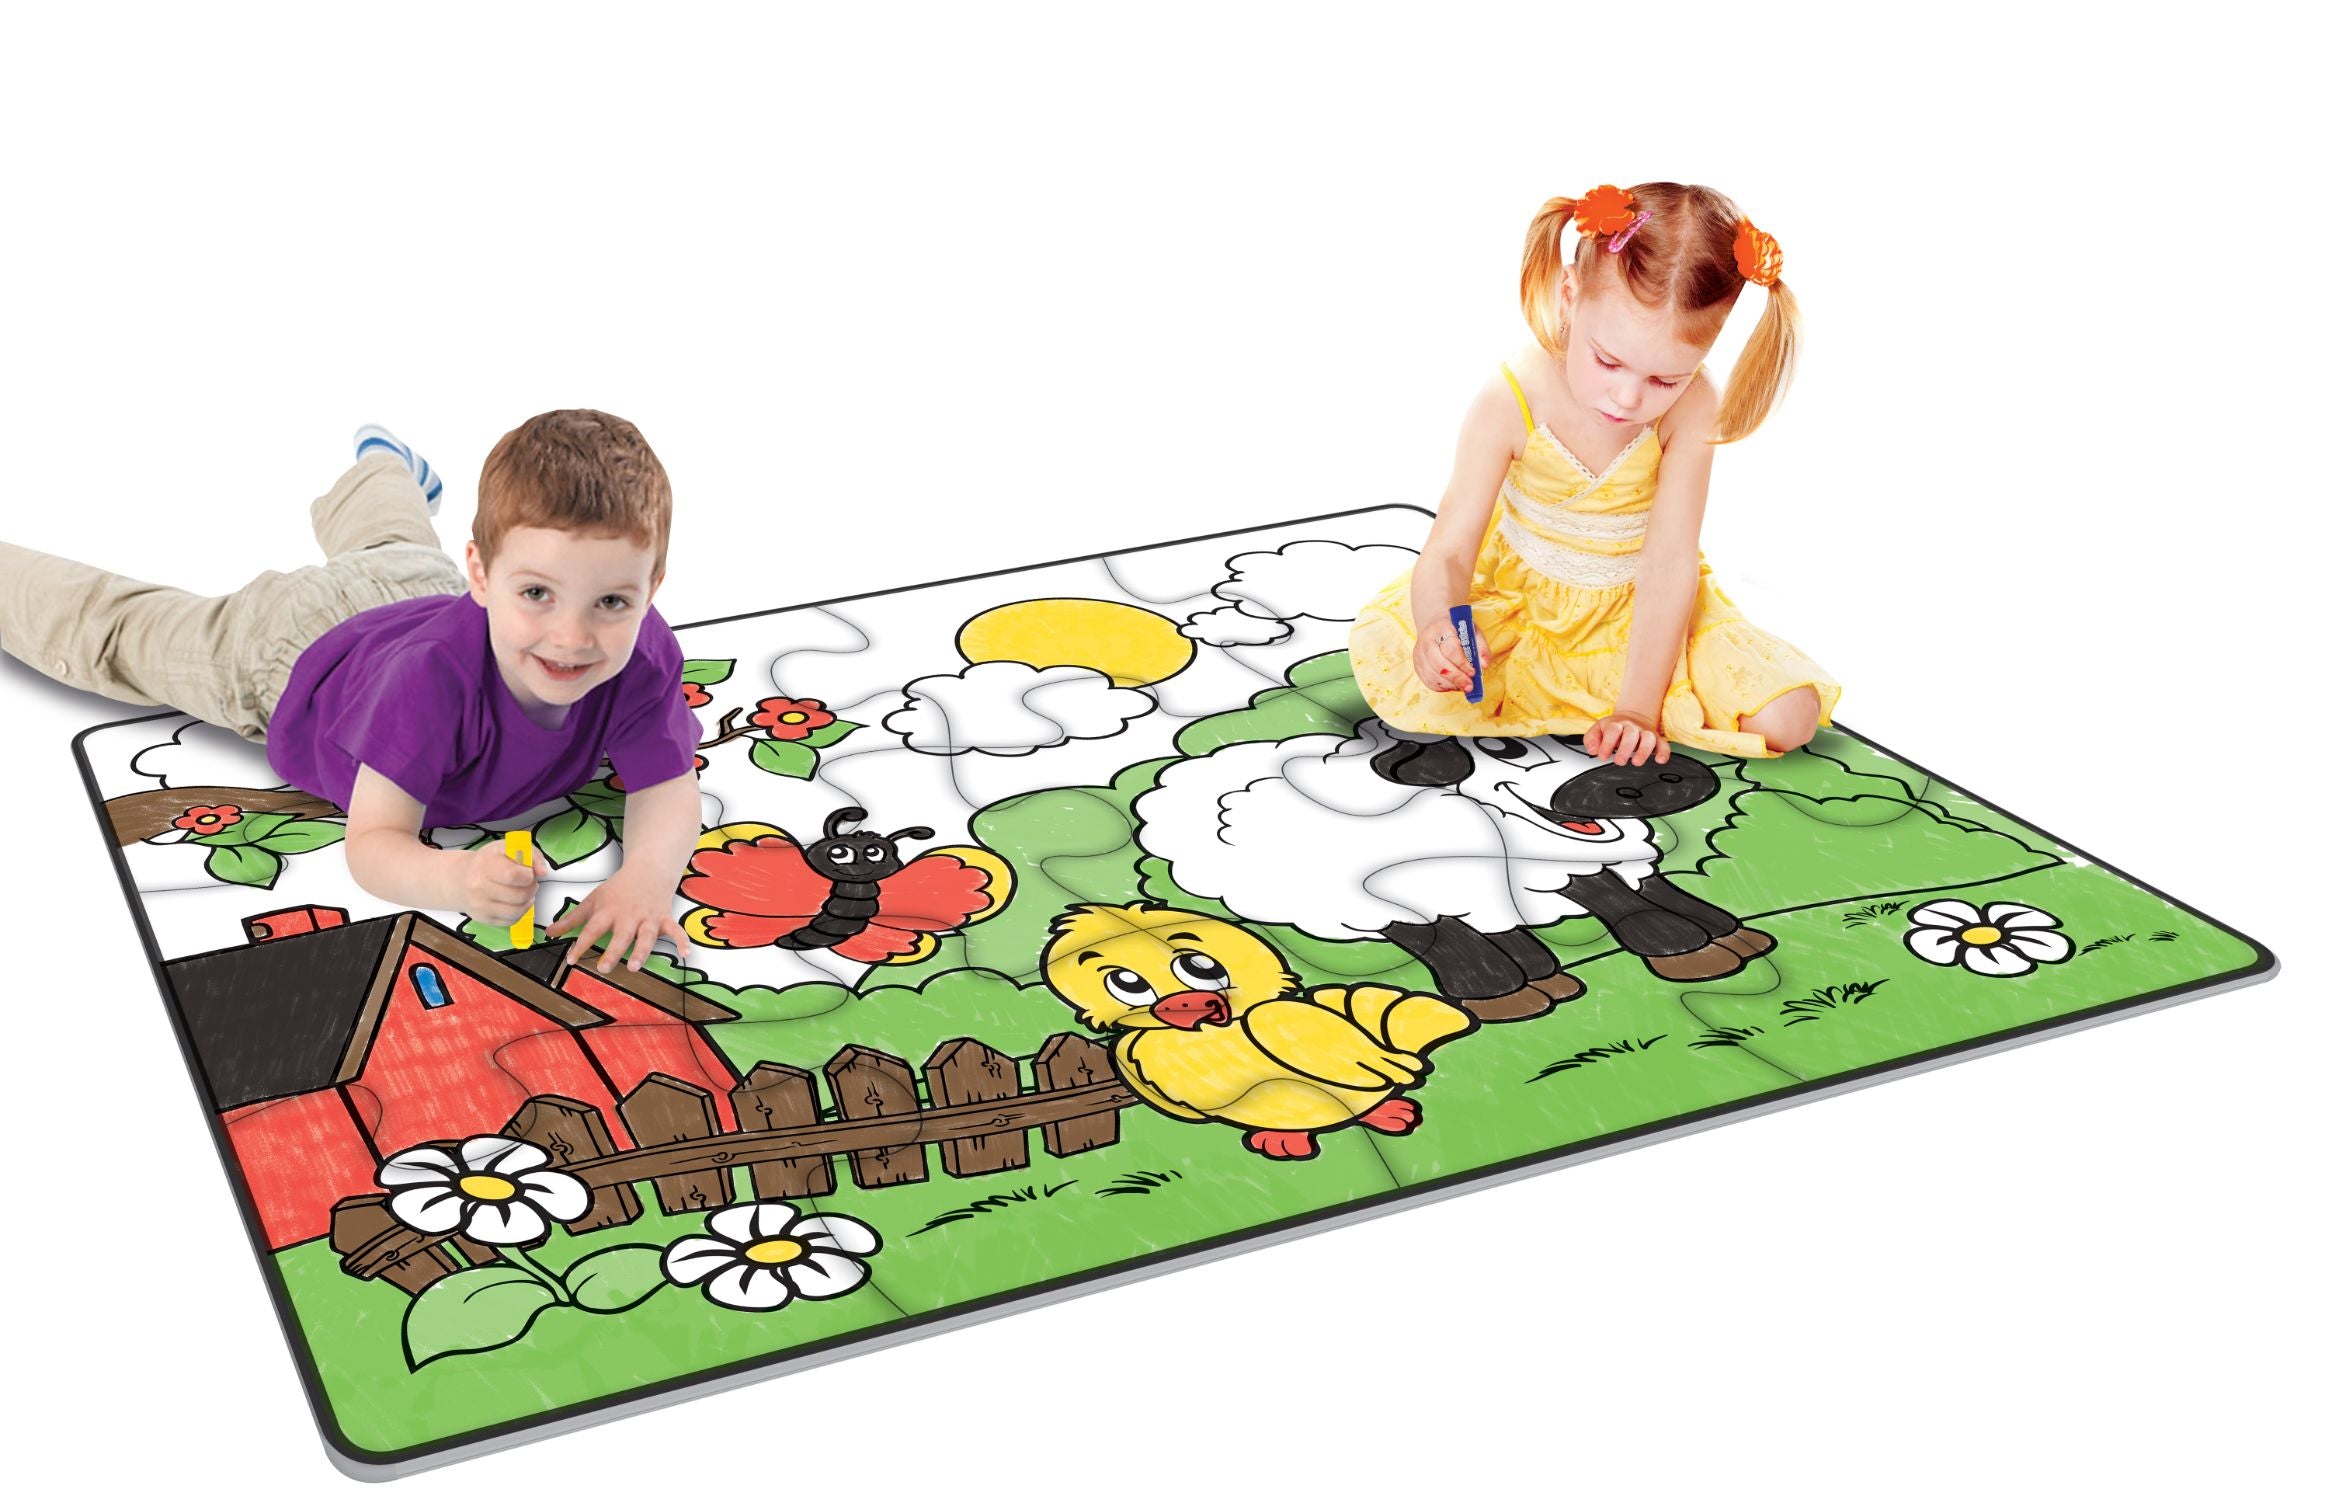 Giant Paint a Puzzle - Fun at the Farm Floor Painting Puzzle - by Little Brian